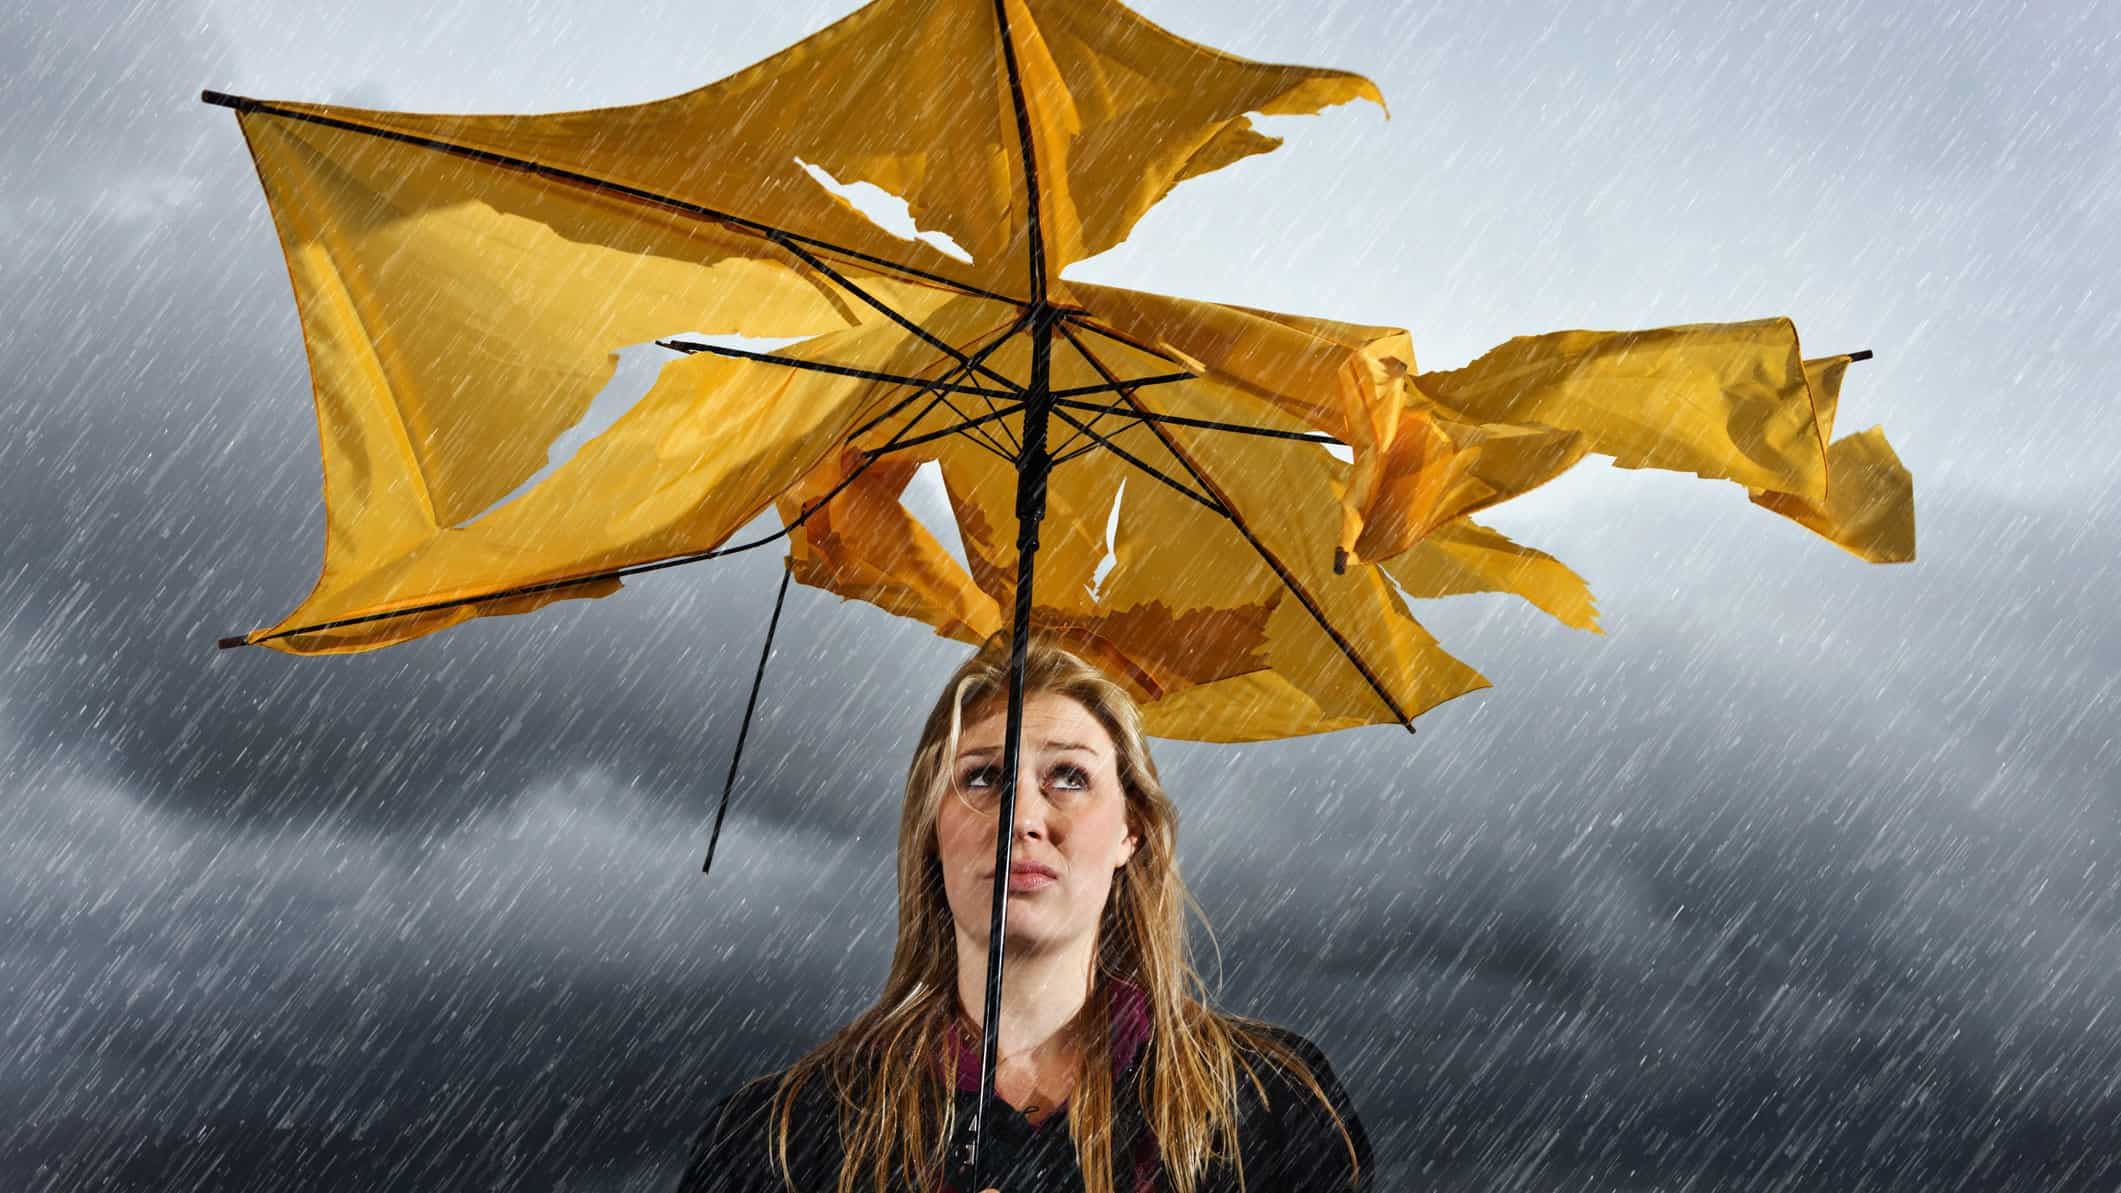 A woman with a sad face stands under a shredded umbrella in a grey thunderstorm